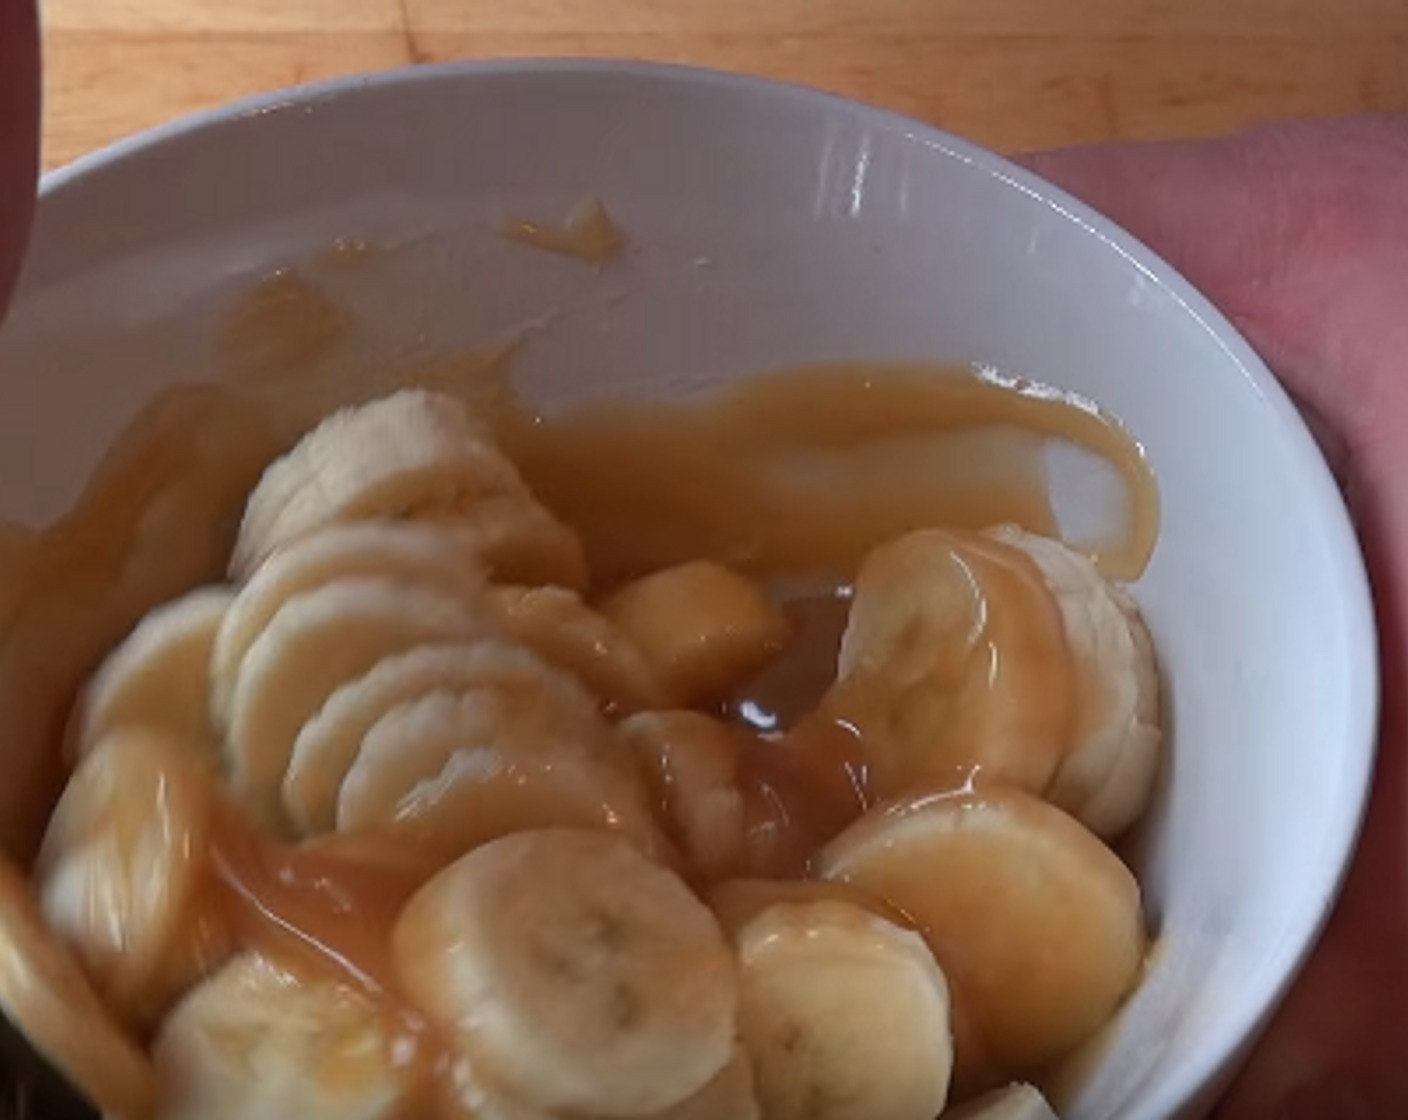 step 2 In a bowl, warm Toffee Sauce (1/2 cup) in the microwave. Add sliced Bananas (2) to warmed sauce and gently toss.